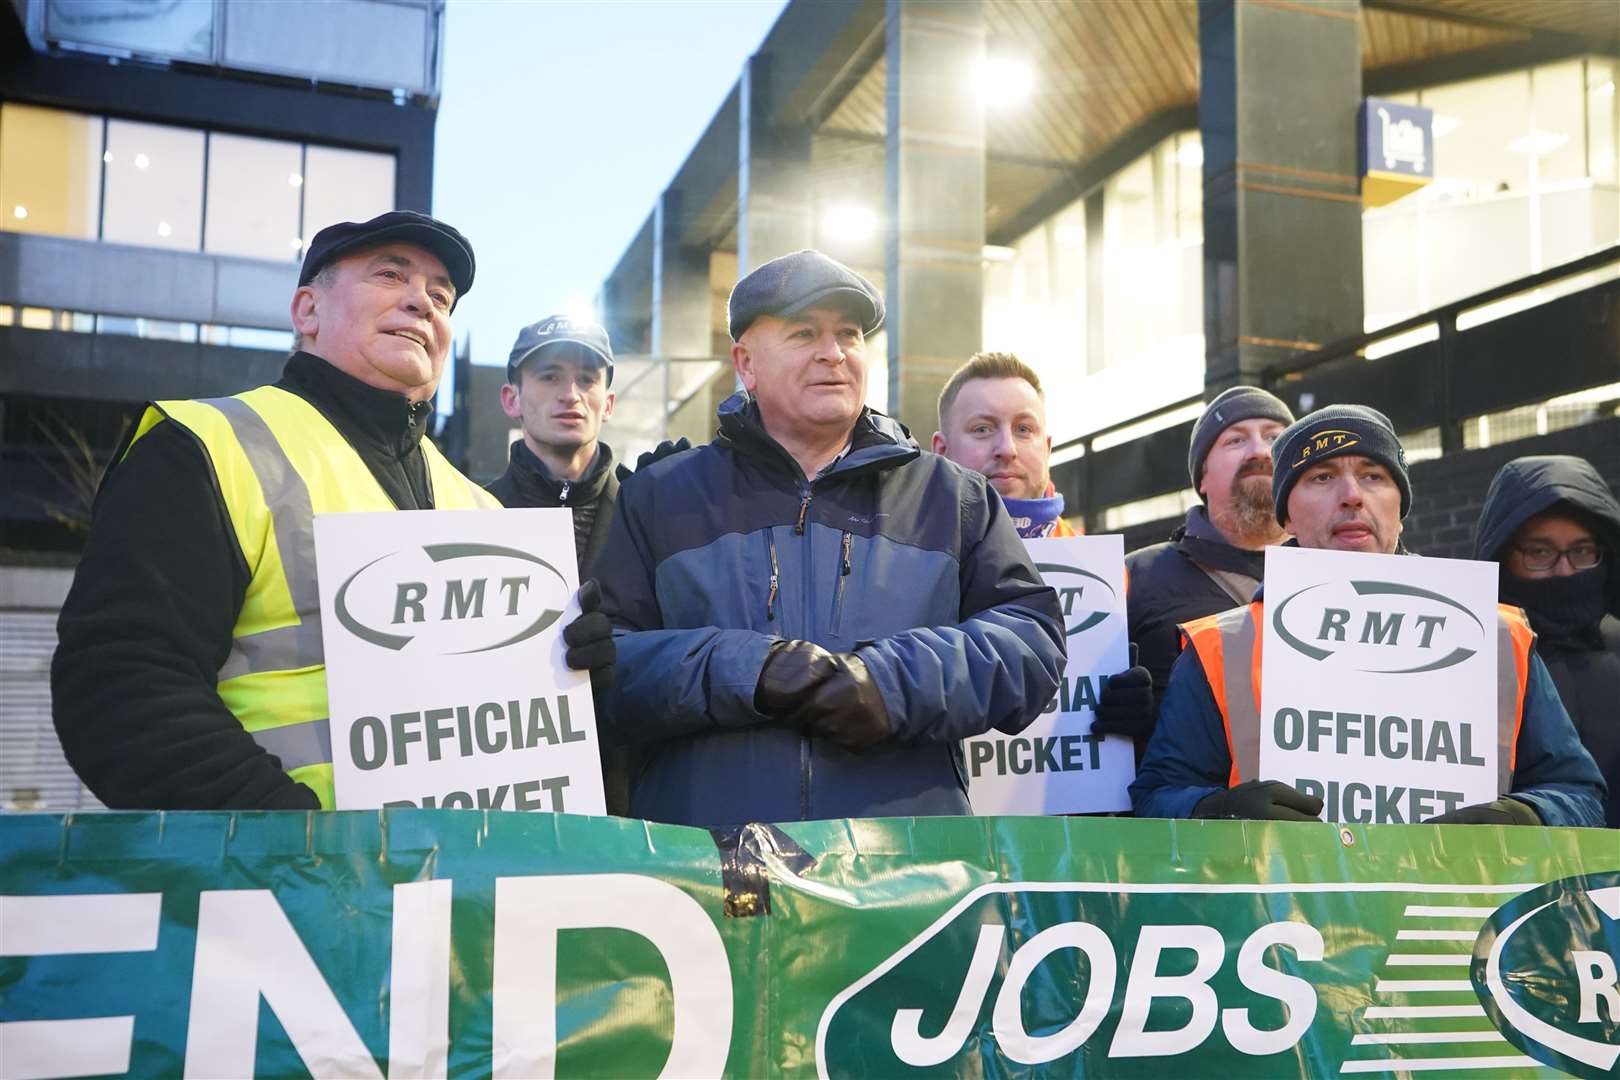 Mick Lynch (centre) joins RMT members on the picket line outside London Euston train station during a strike in a long-running dispute over jobs and pensions (James Manning/PA)